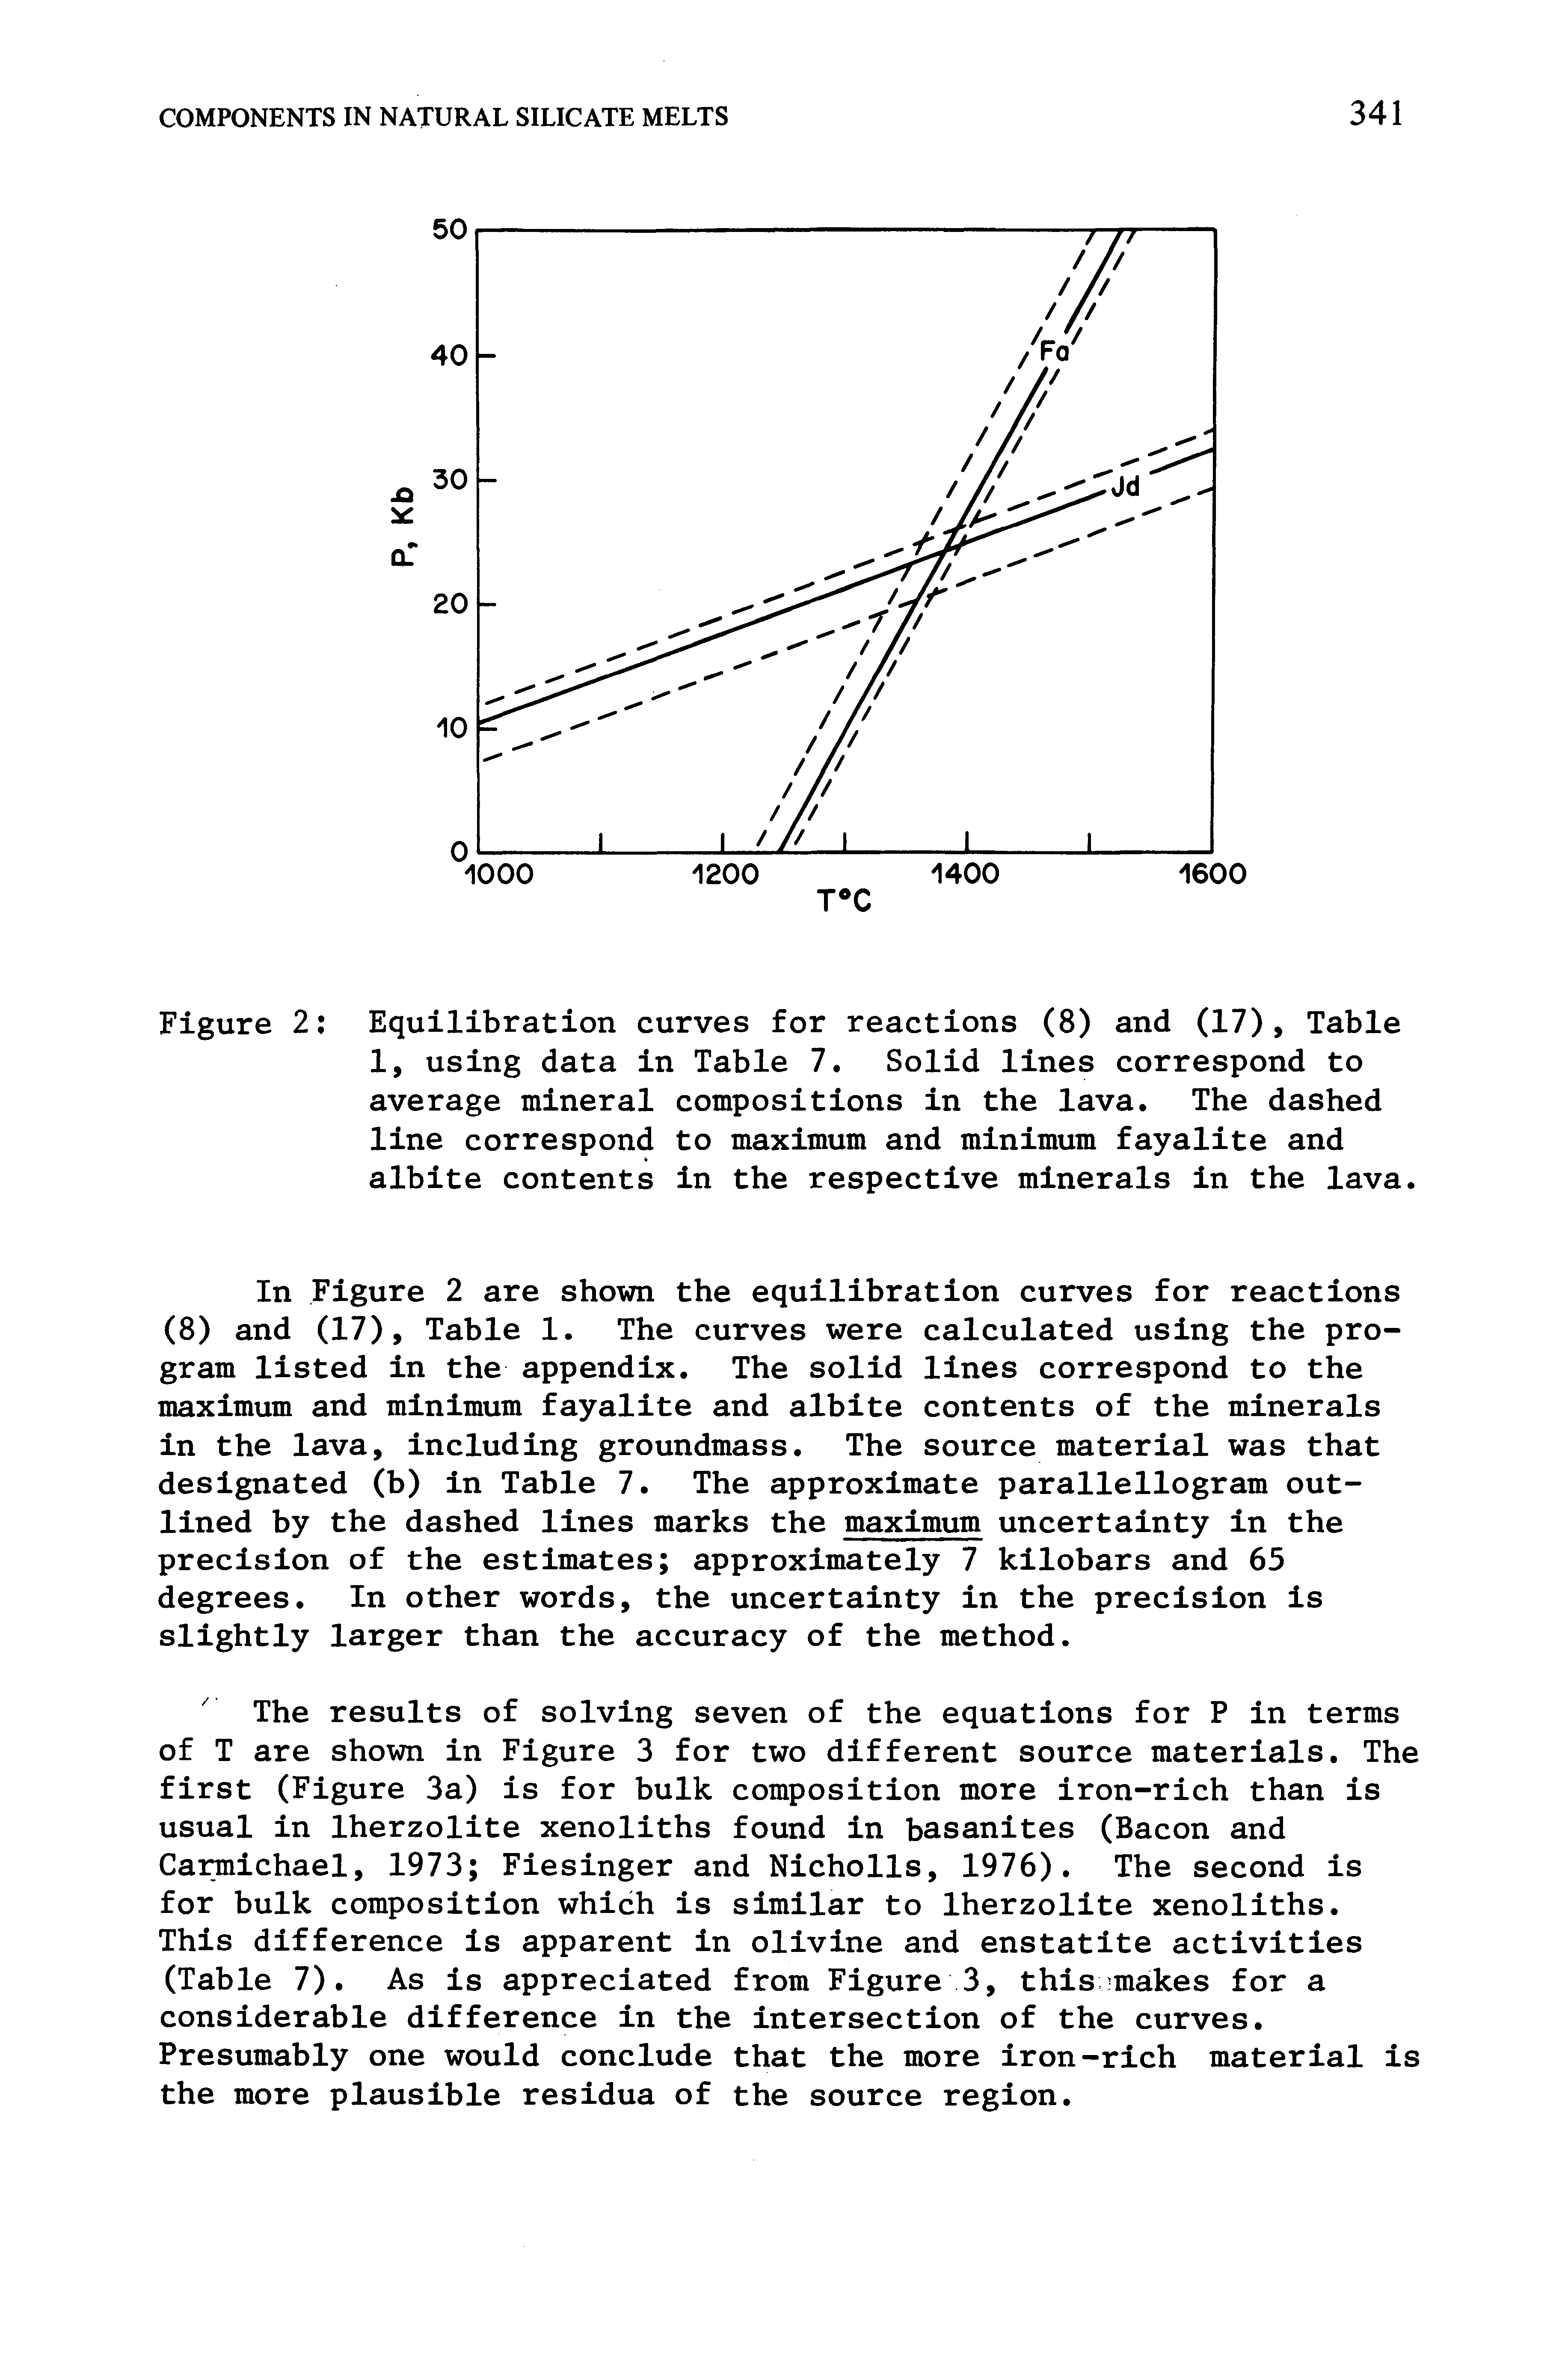 Figure 2 Equilibration curves for reactions (8) and (17), Table 1, using data in Table 7, Solid lines correspond to average mineral compositions in the lava. The dashed line correspond to maximum and minimum fayalite and albite contents in the respective minerals in the lava.